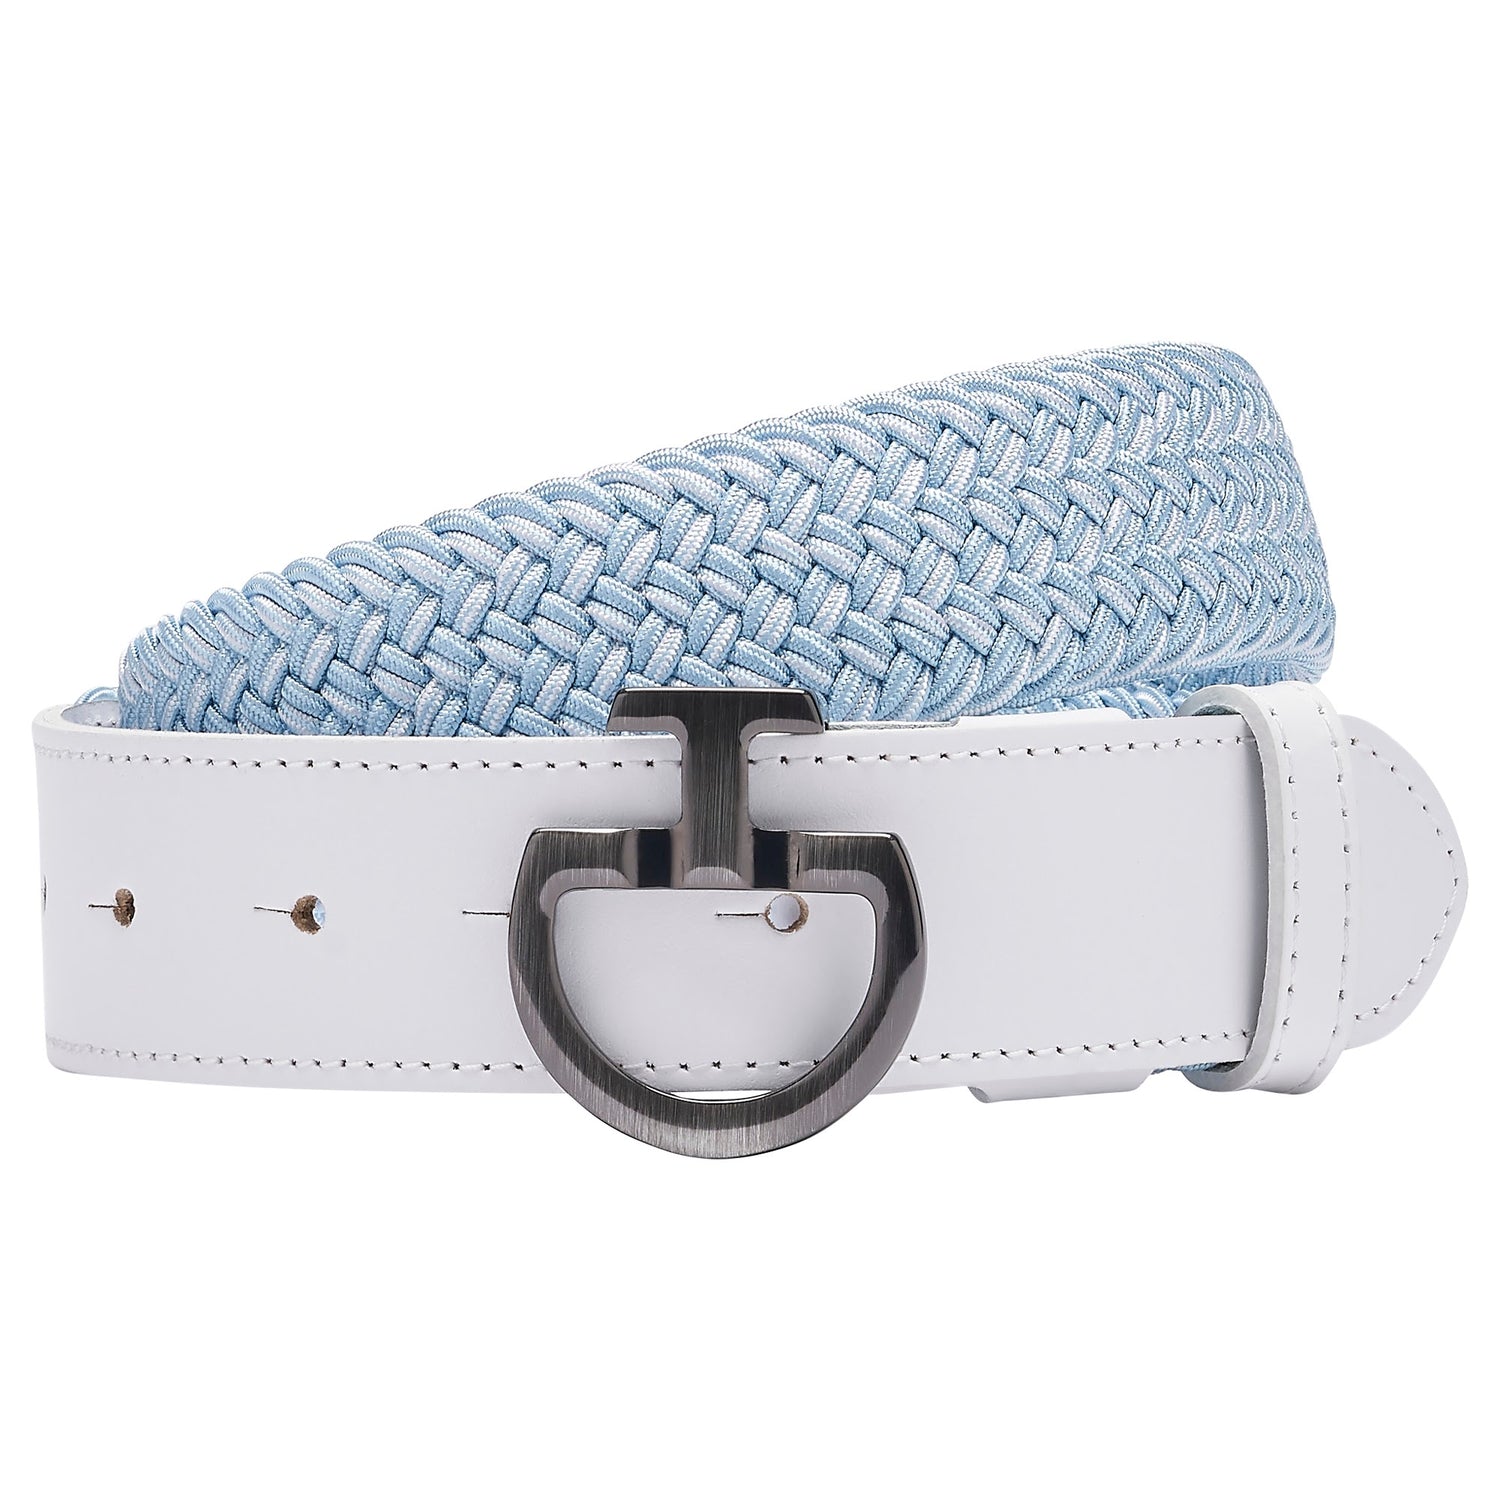 Your favourite Cavalleria Toscana belt to match this seasons colours. blue and white elastic belt with white leather and CT clasp.